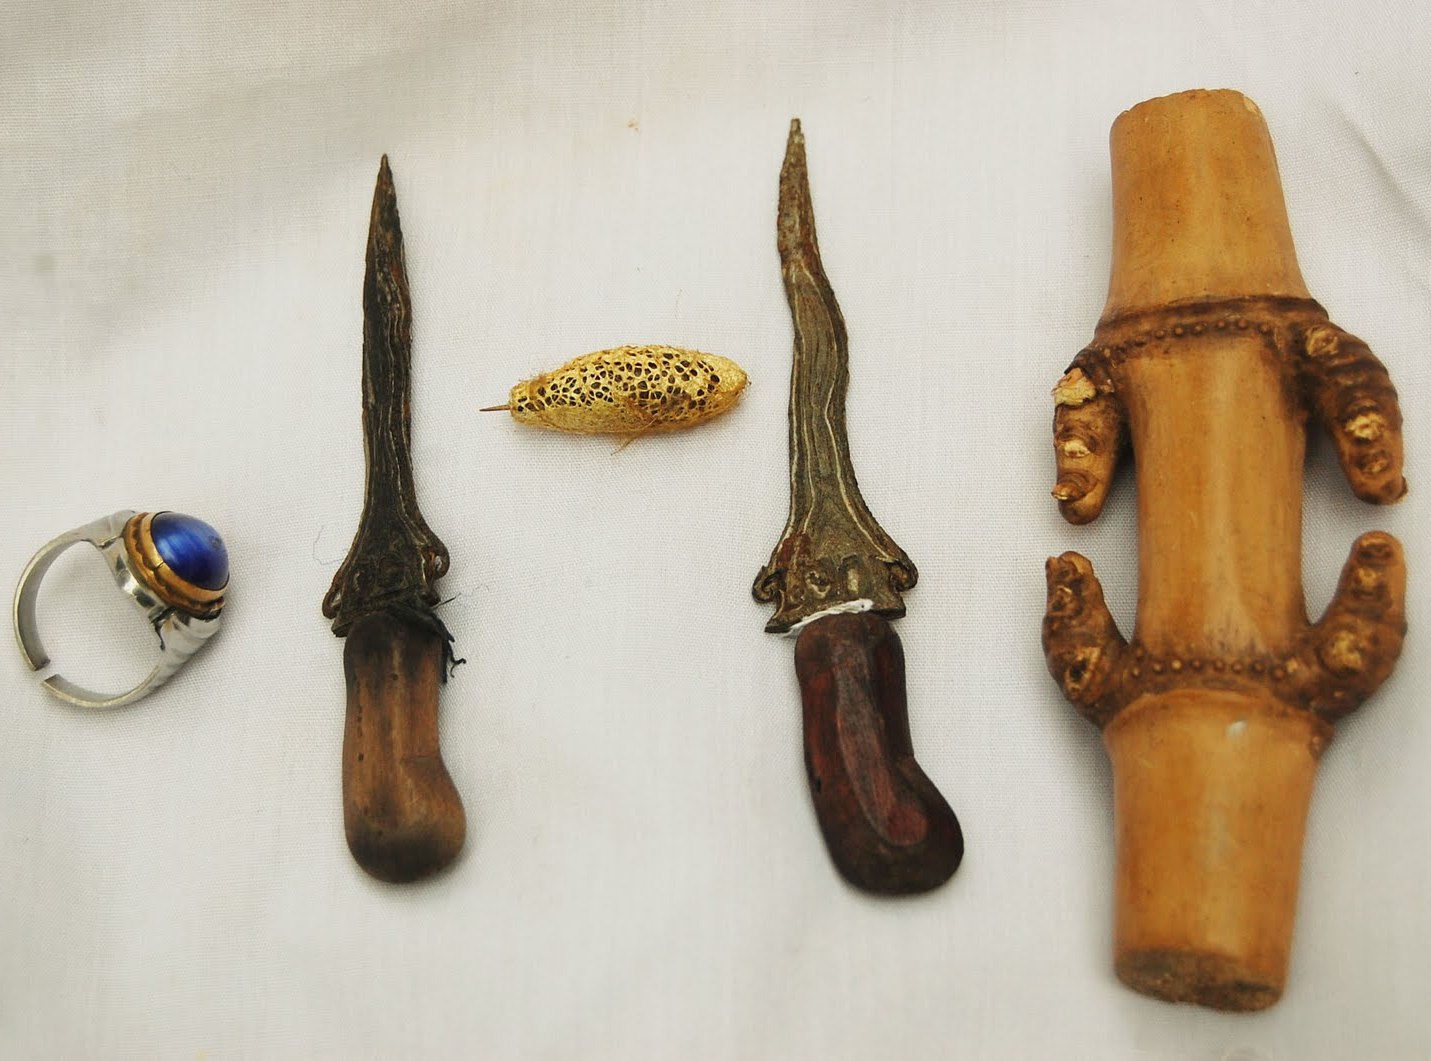  A kris, a ring, a keris, and a bamboo container are displayed on a white cloth.